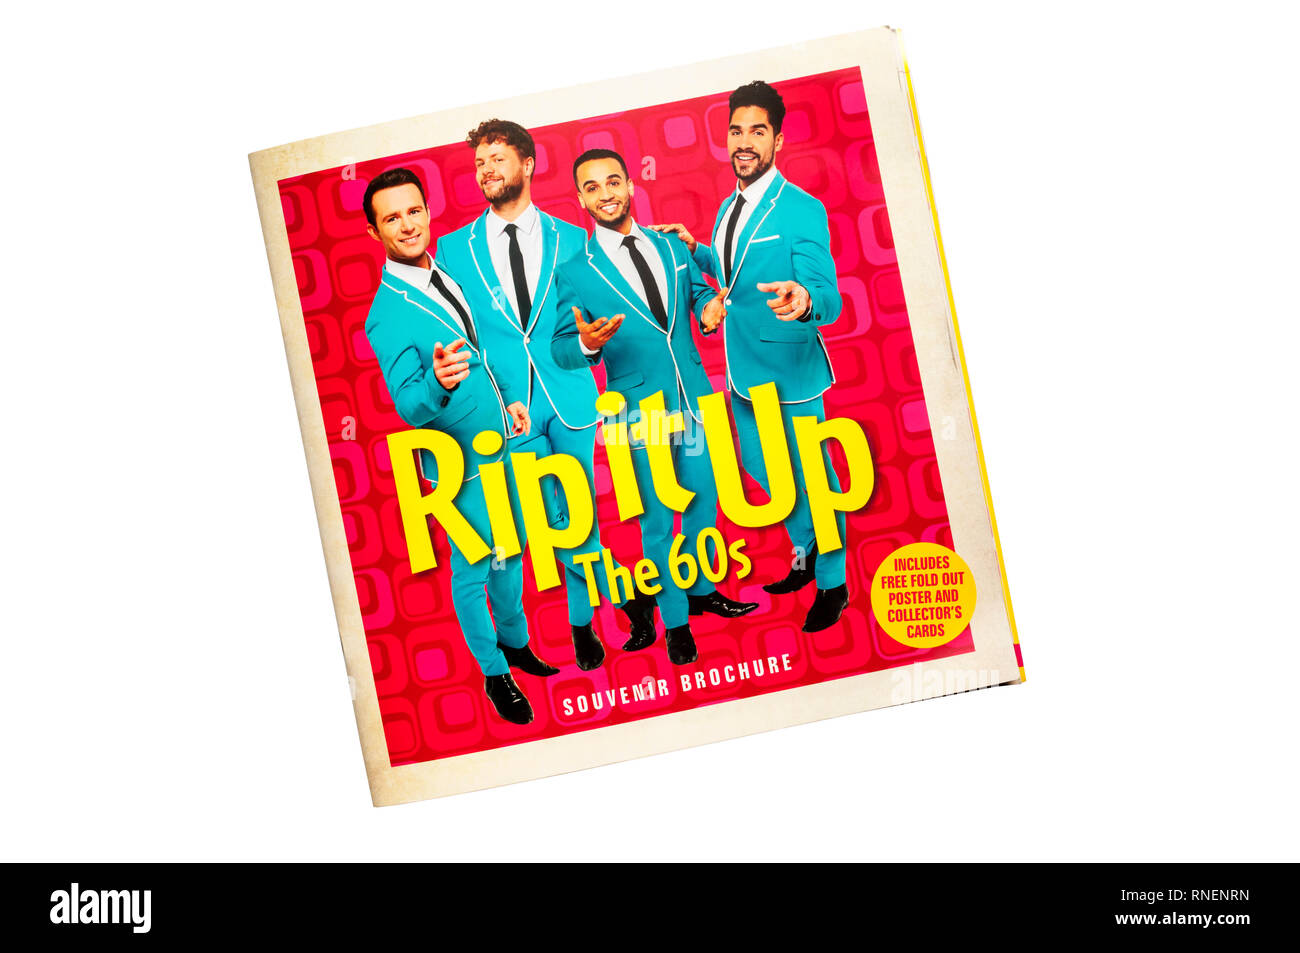 Souvenir Brochure for the 2019 production of Rip it Up The 60s at the Garrick Theatre.  Featuring dance and music from the 1960s. Stock Photo